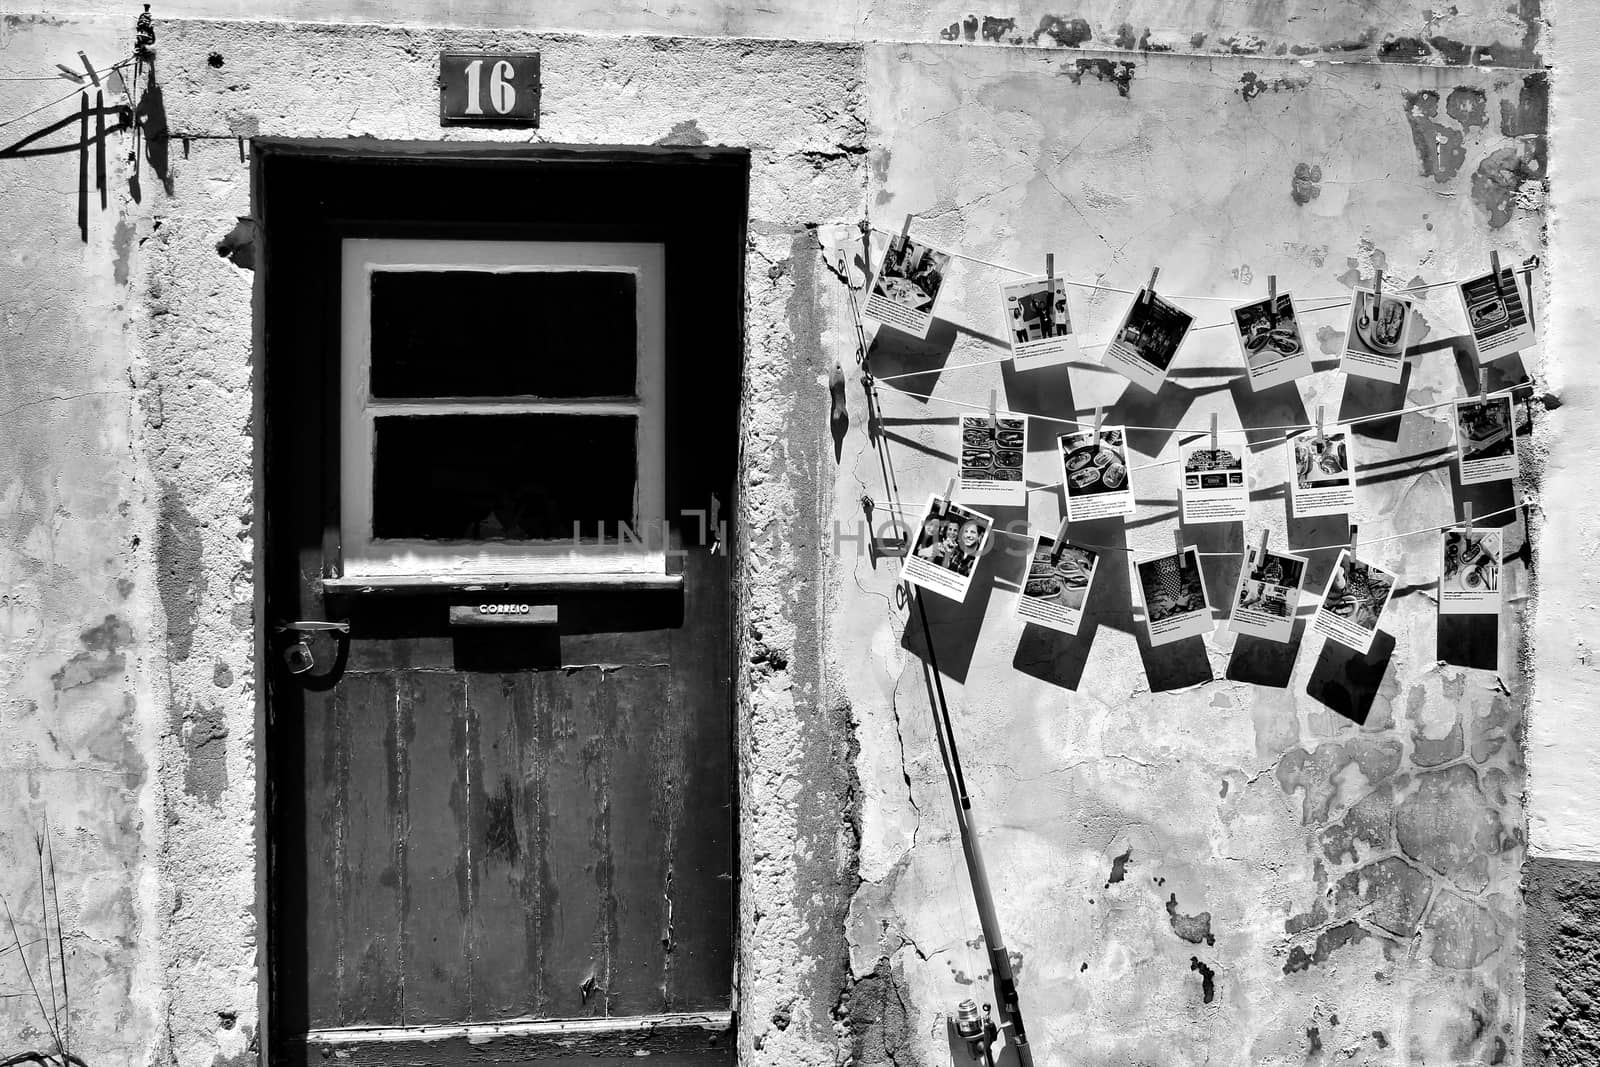 Old wooden door with stone facade and postal cards hanging on the wall.